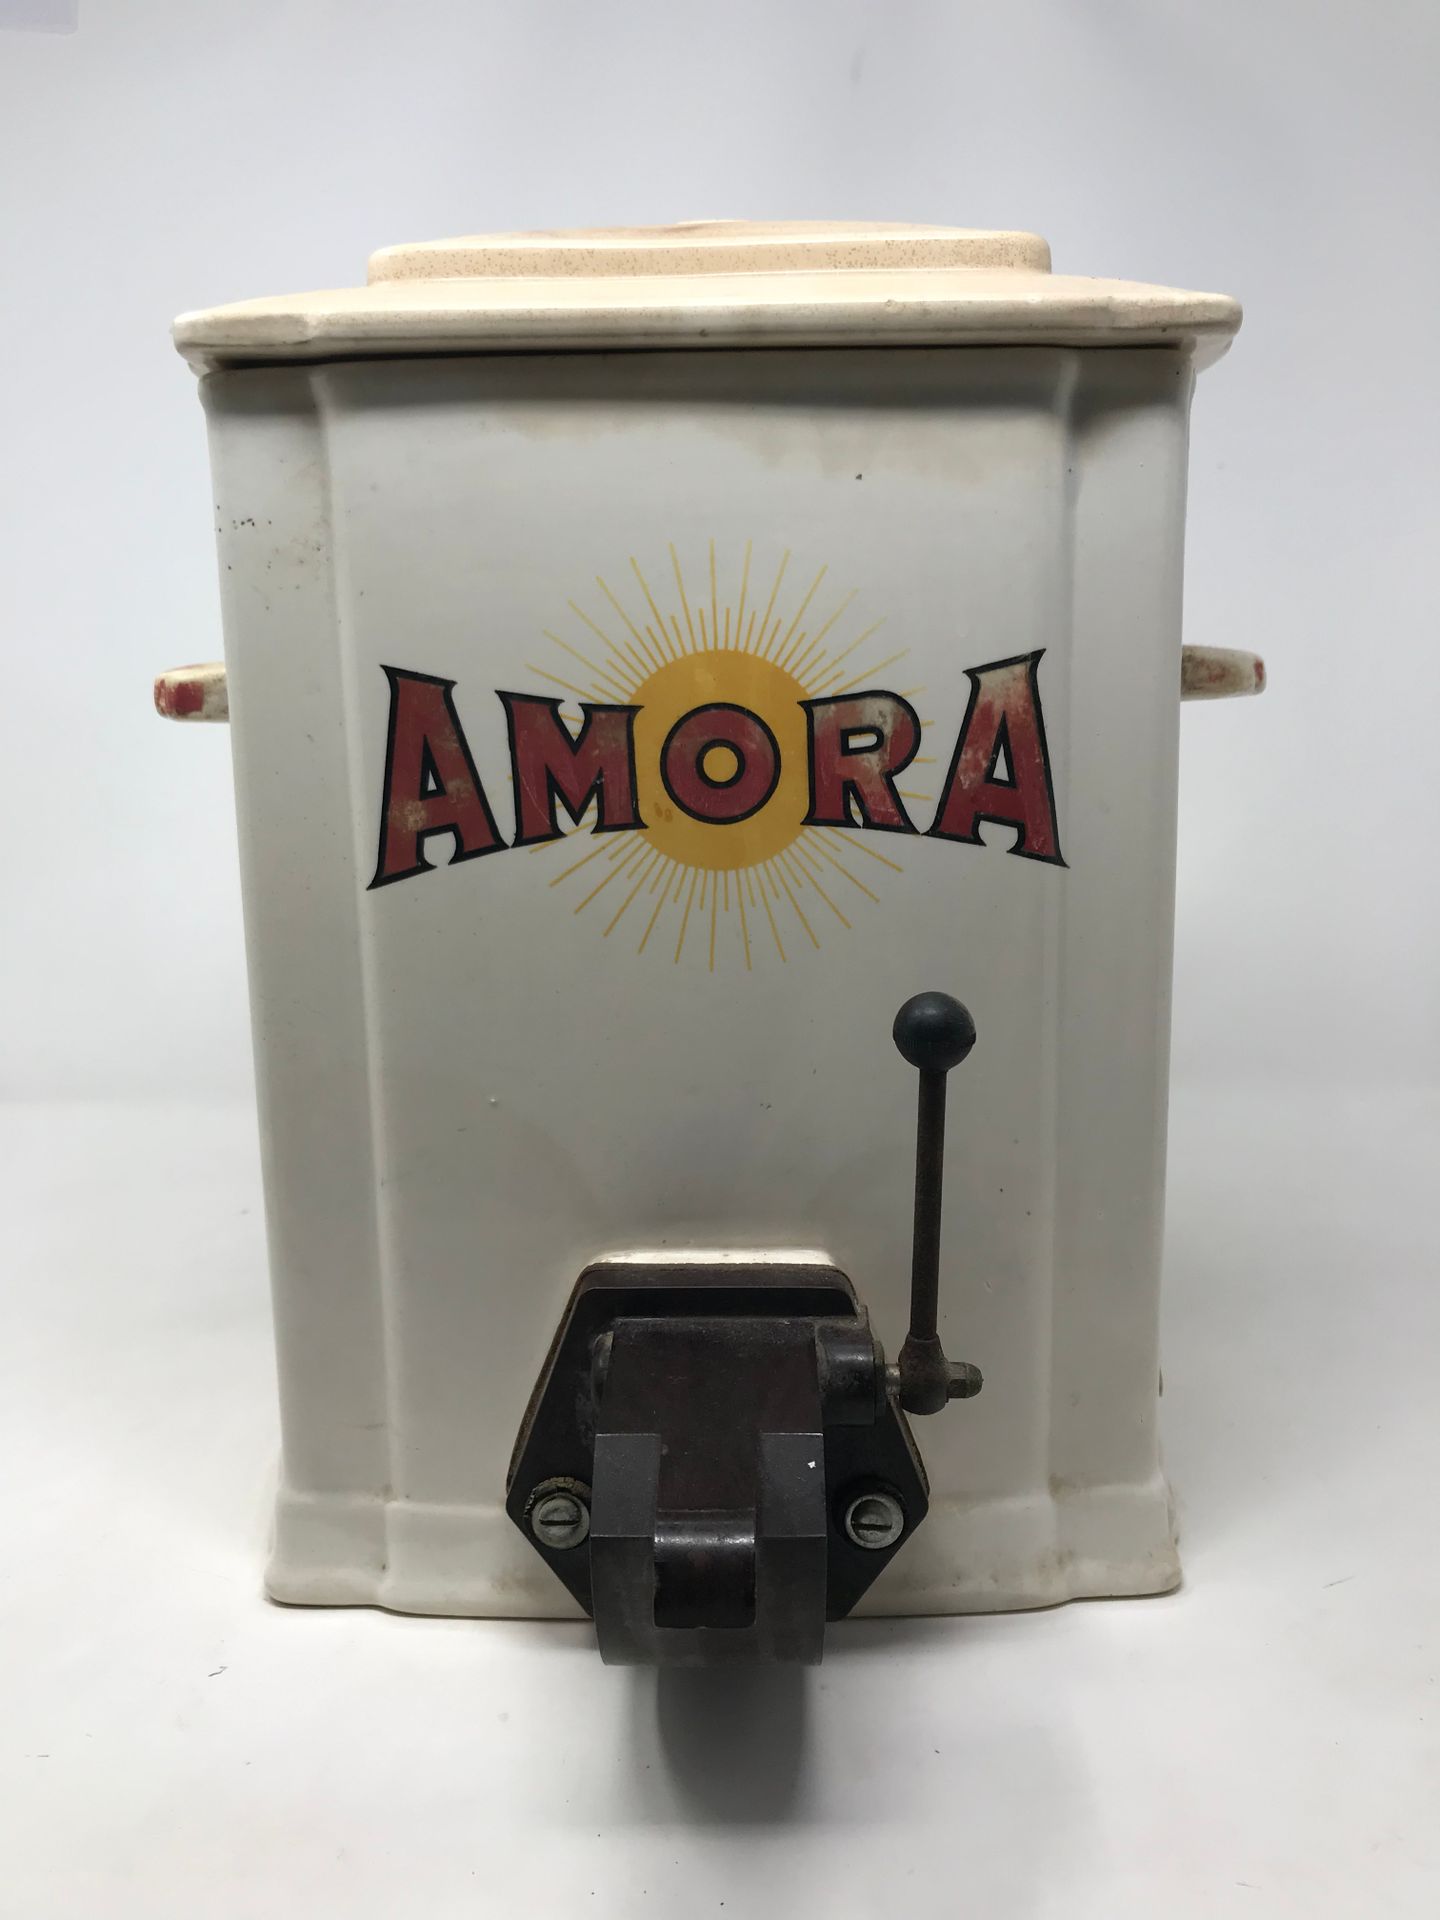 Null AMORA

Large mustard dispenser

Sarreguemines

Accident with the lid